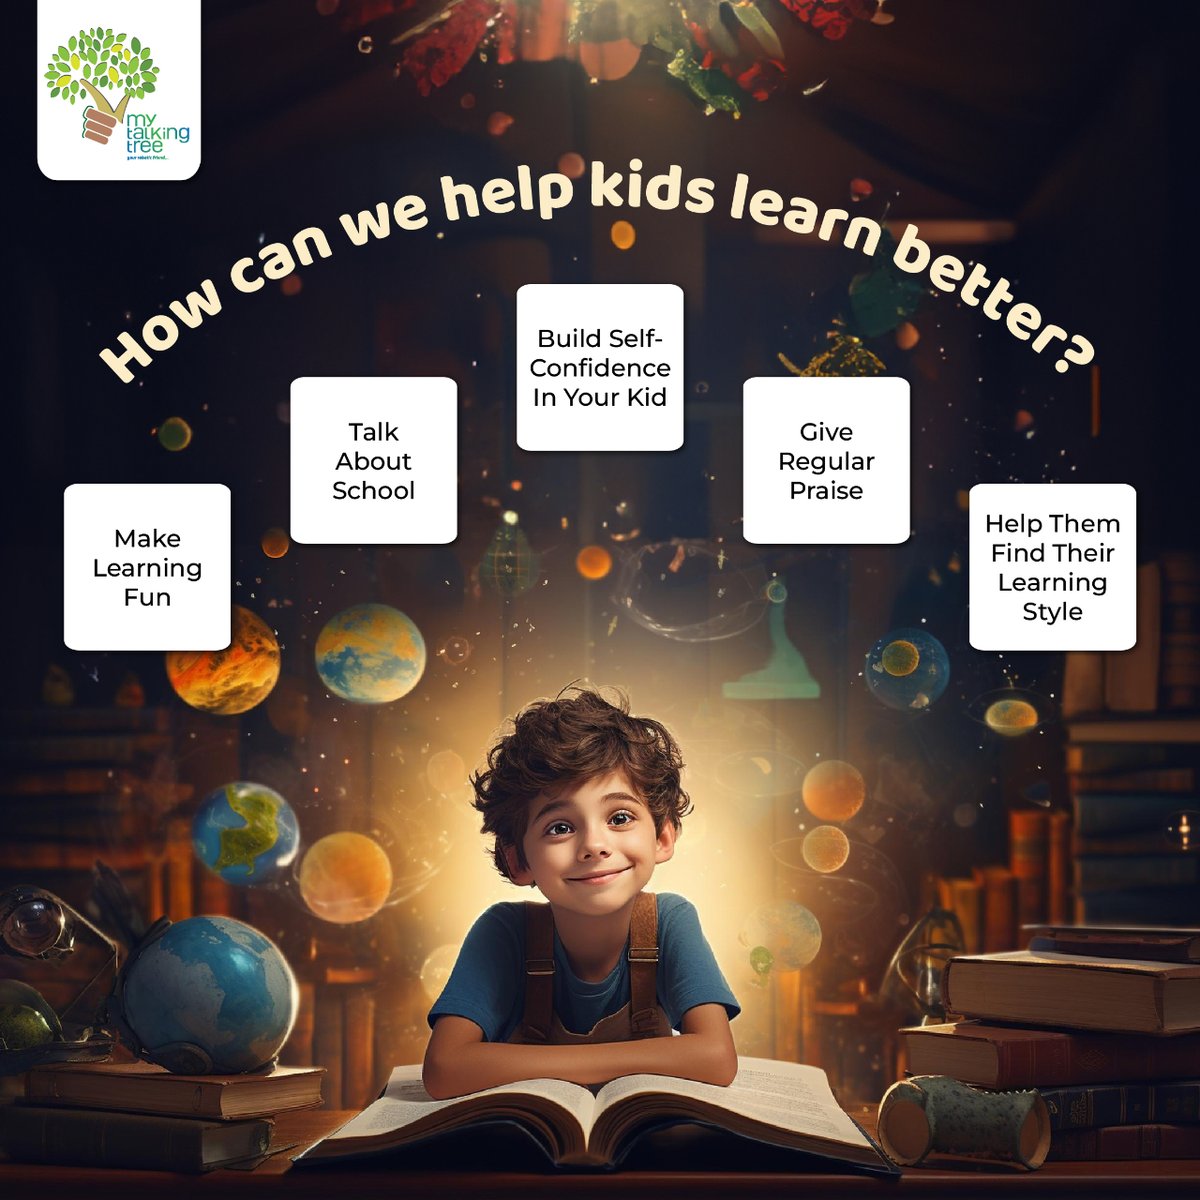 Turn education into a fun-filled experience! ✨Follow these 5 tips✨ to help your child thrive and make learning fun and engaging.

#Mytalkingtree #mrdudu #robotic #InteractiveLearning #RoboticTeacher #TechnologyinEducation #RoboEducator #hyperactivekids #VirtualTeacher